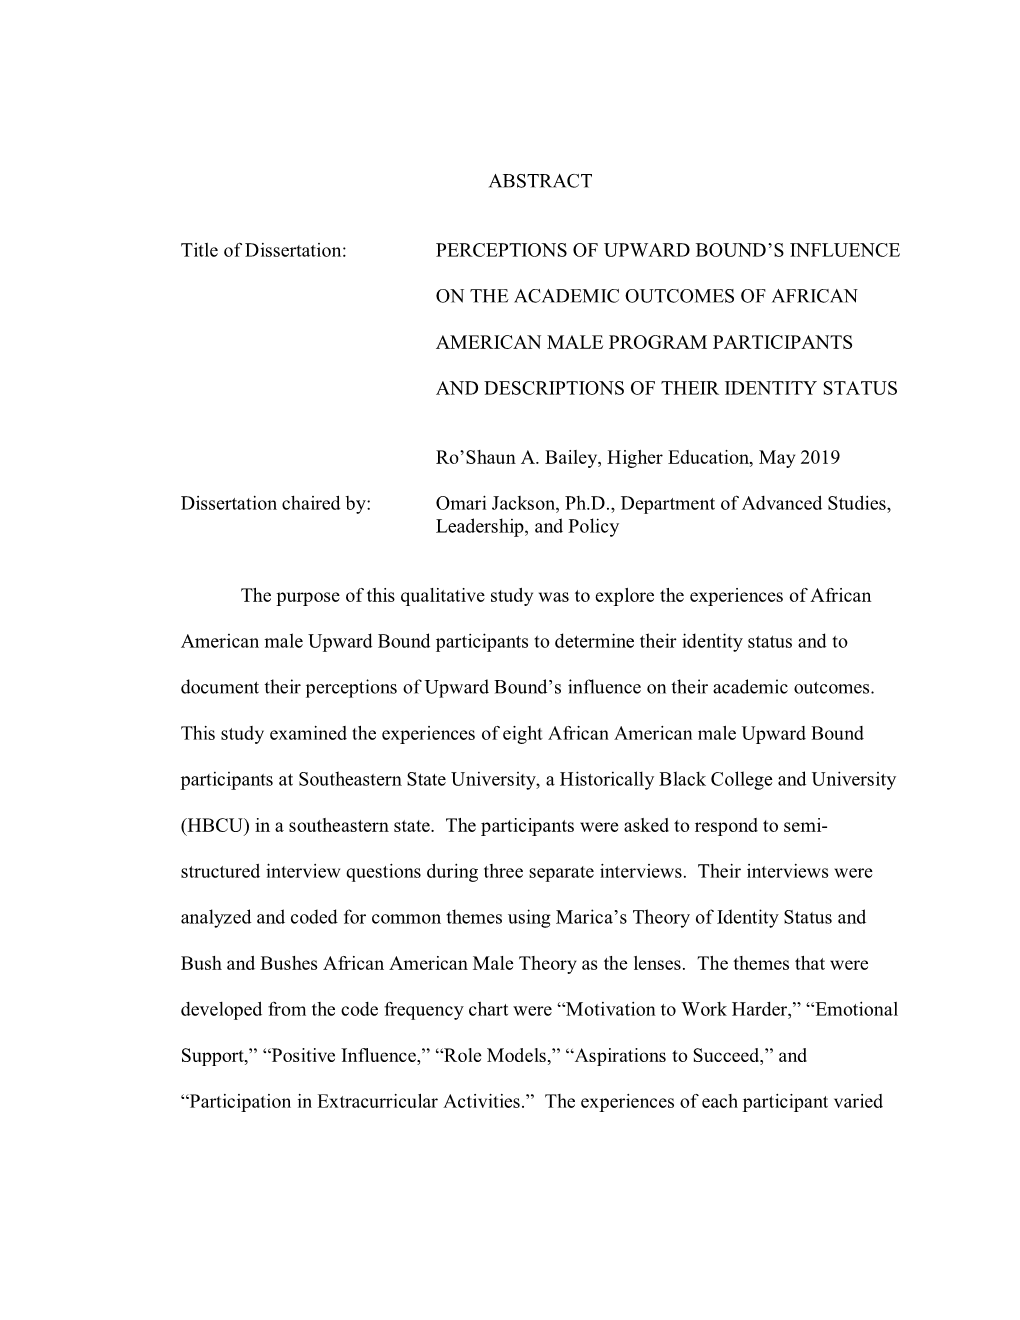 ABSTRACT Title of Dissertation: PERCEPTIONS of UPWARD BOUND's INFLUENCE on the ACADEMIC OUTCOMES of AFRICAN AMERICAN MALE PROG